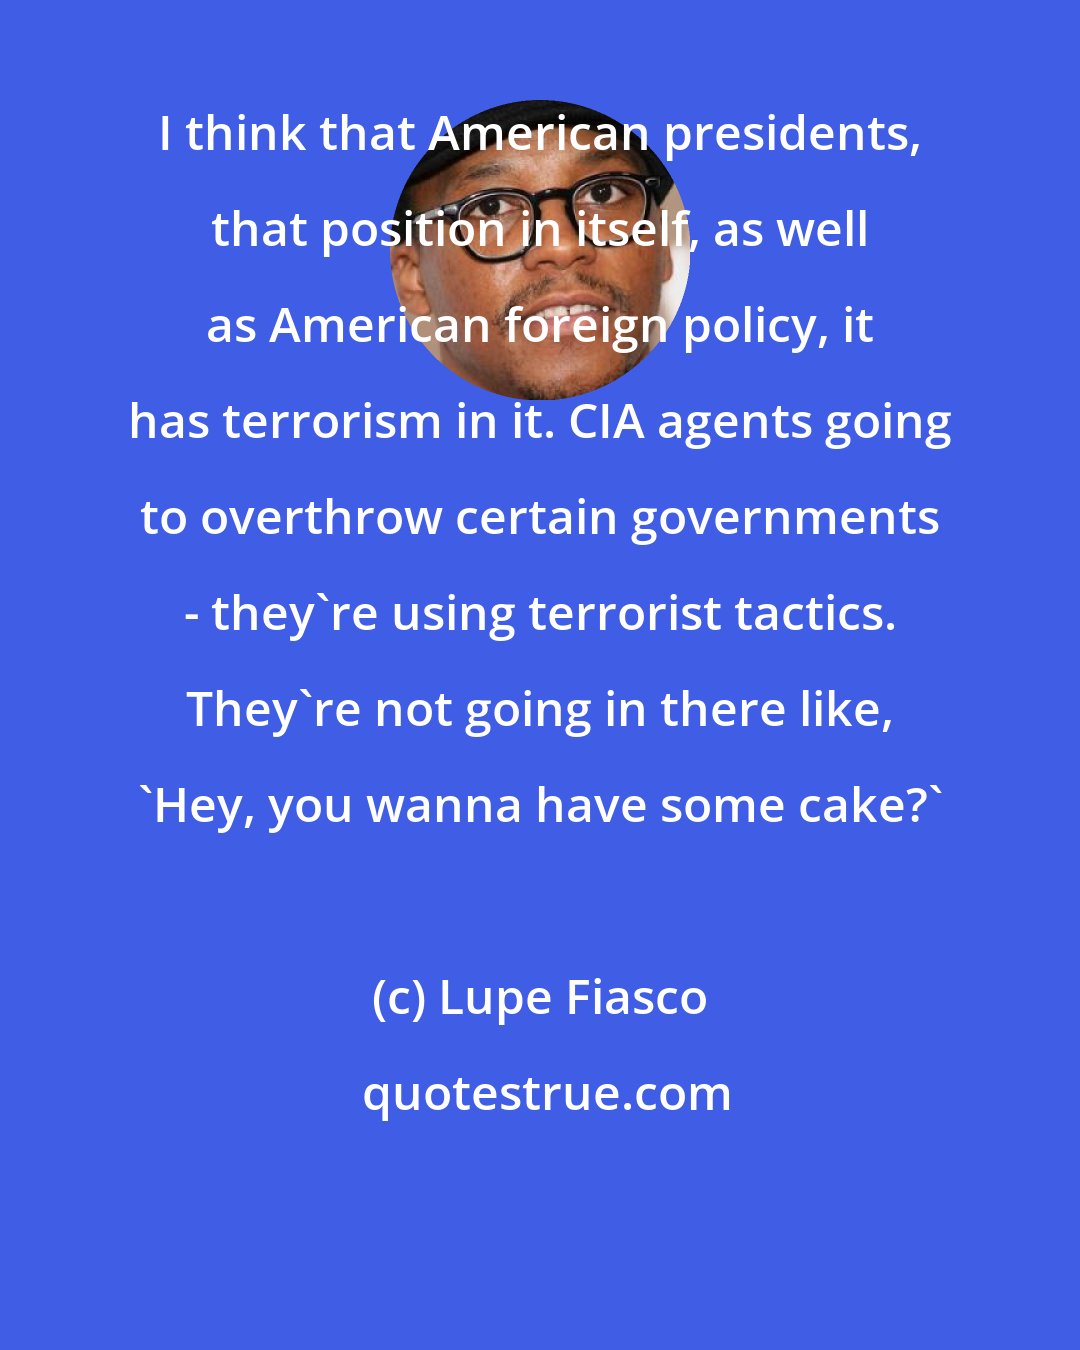 Lupe Fiasco: I think that American presidents, that position in itself, as well as American foreign policy, it has terrorism in it. CIA agents going to overthrow certain governments - they're using terrorist tactics. They're not going in there like, 'Hey, you wanna have some cake?'